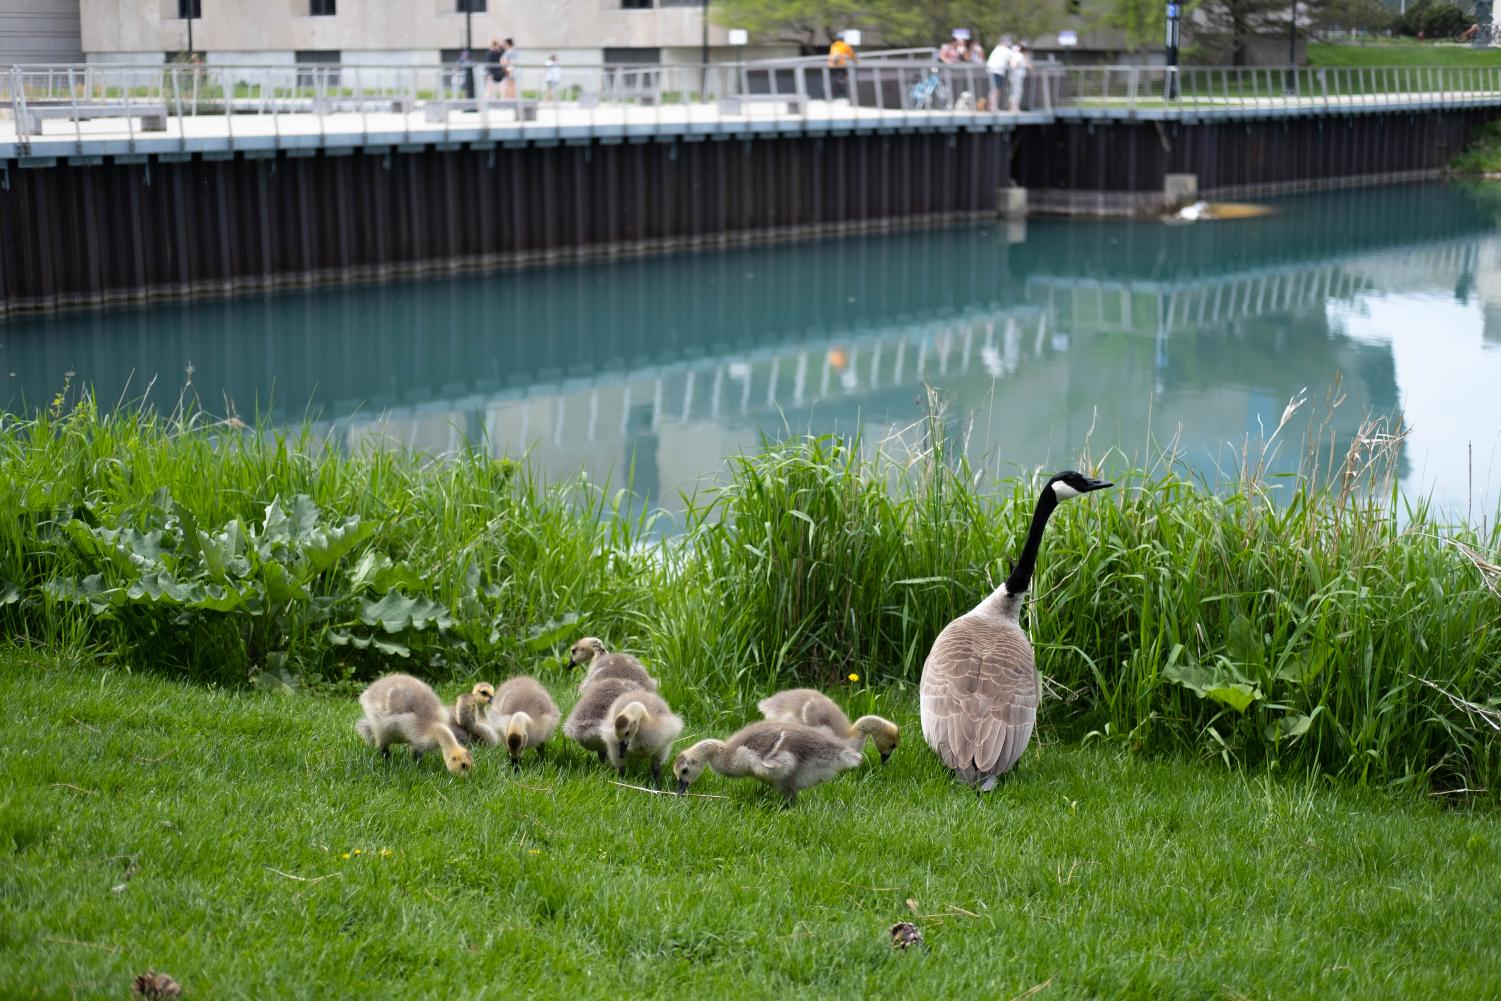 A group of goslings and a goose stand on grass in front of a body of water and a bridge.